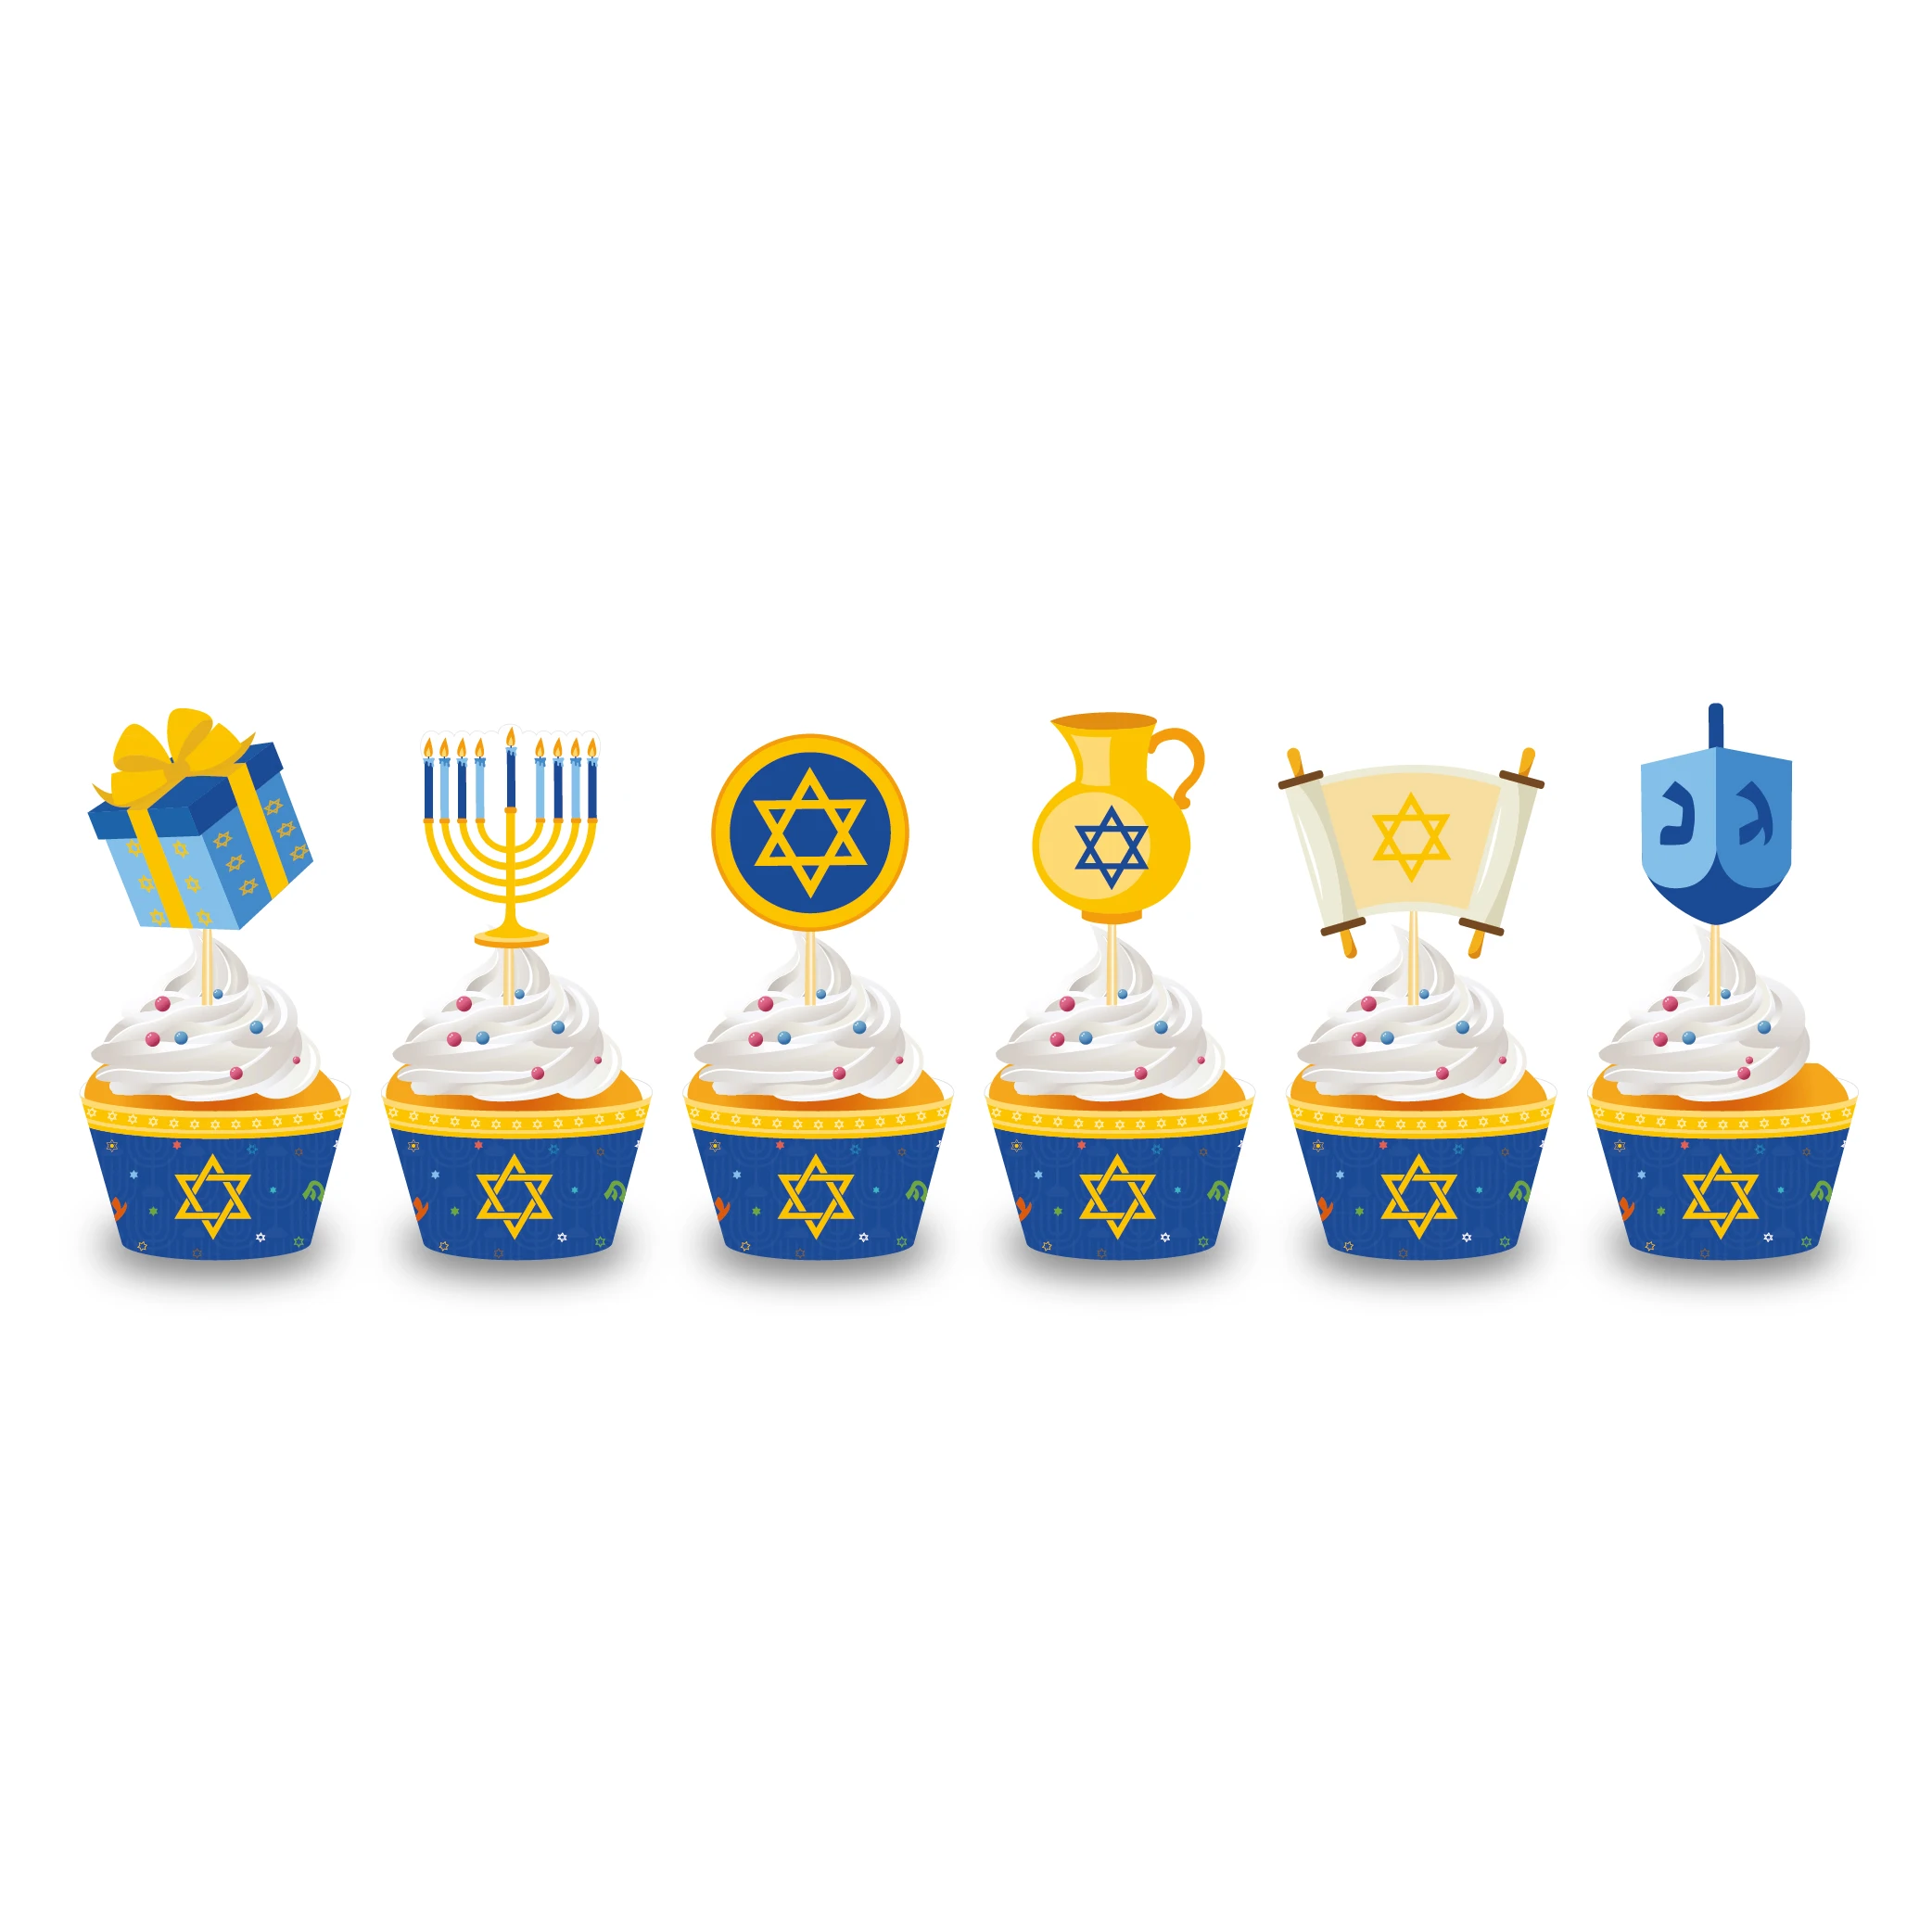 

Happy Hanukkah Party Cake Topper Cupcake Wrapper DIY Chanukah Party Decorations Xmas Party Cake Decorating Supplies